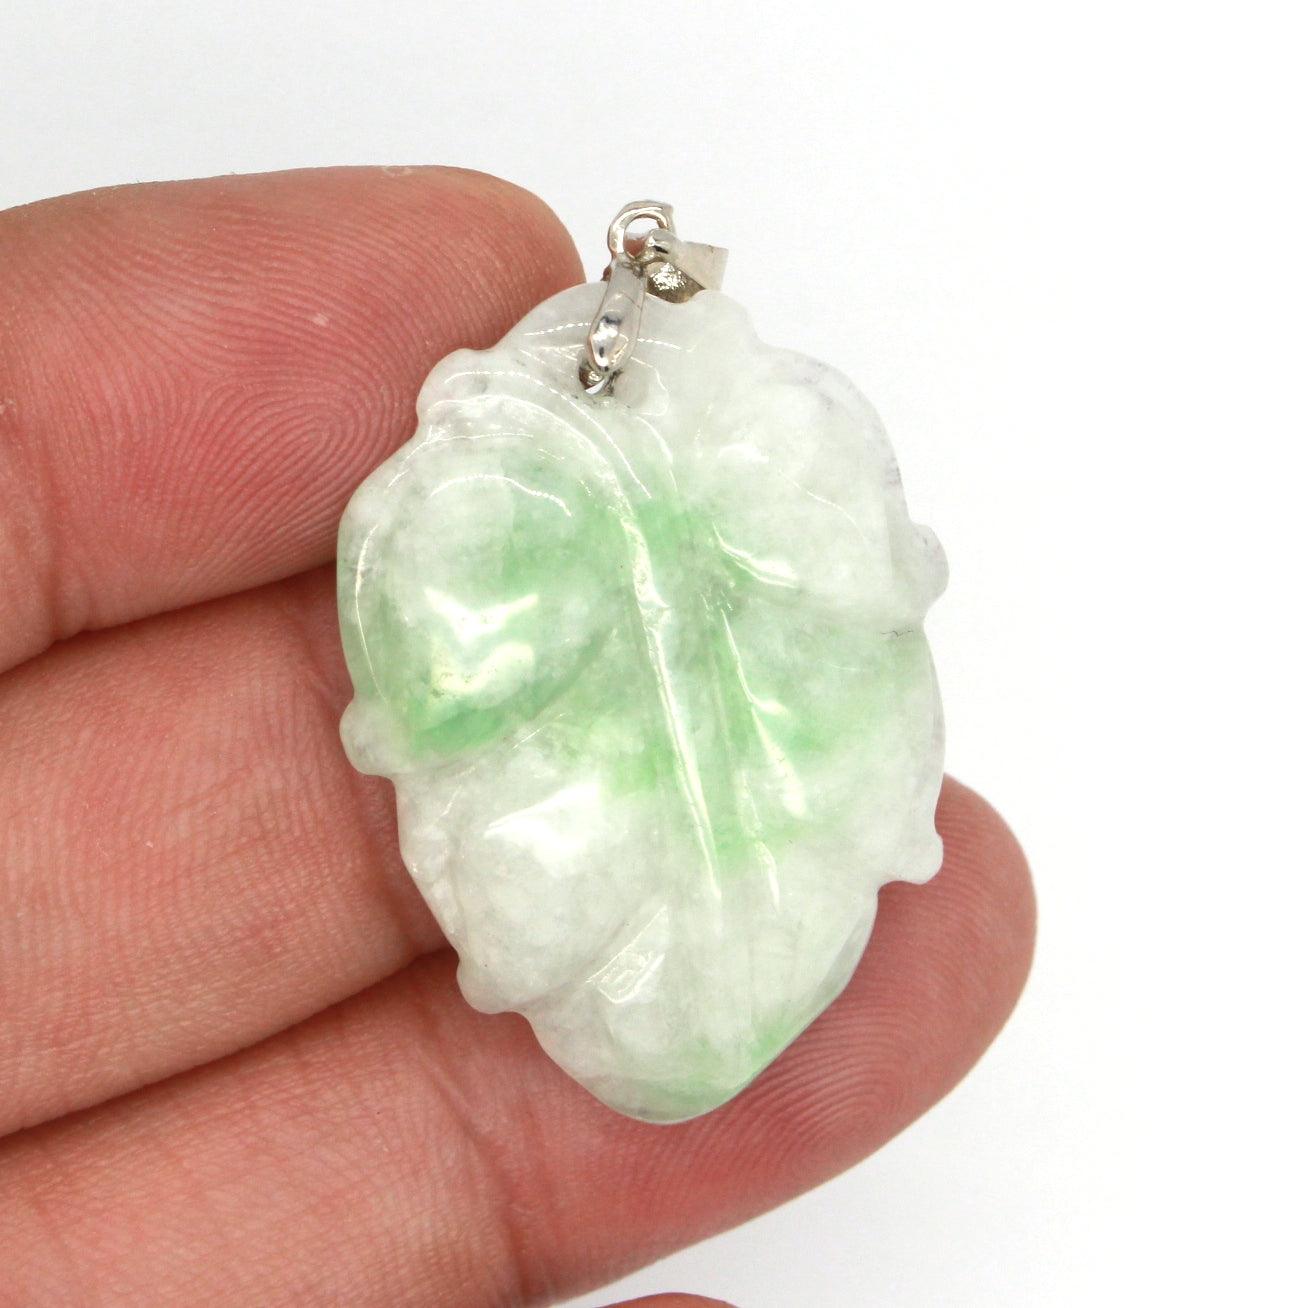 Type A Jadeite Jade Leaf Pendant Series (Fullfill USA only) B08QJDMZF6 - Jade-collector.com